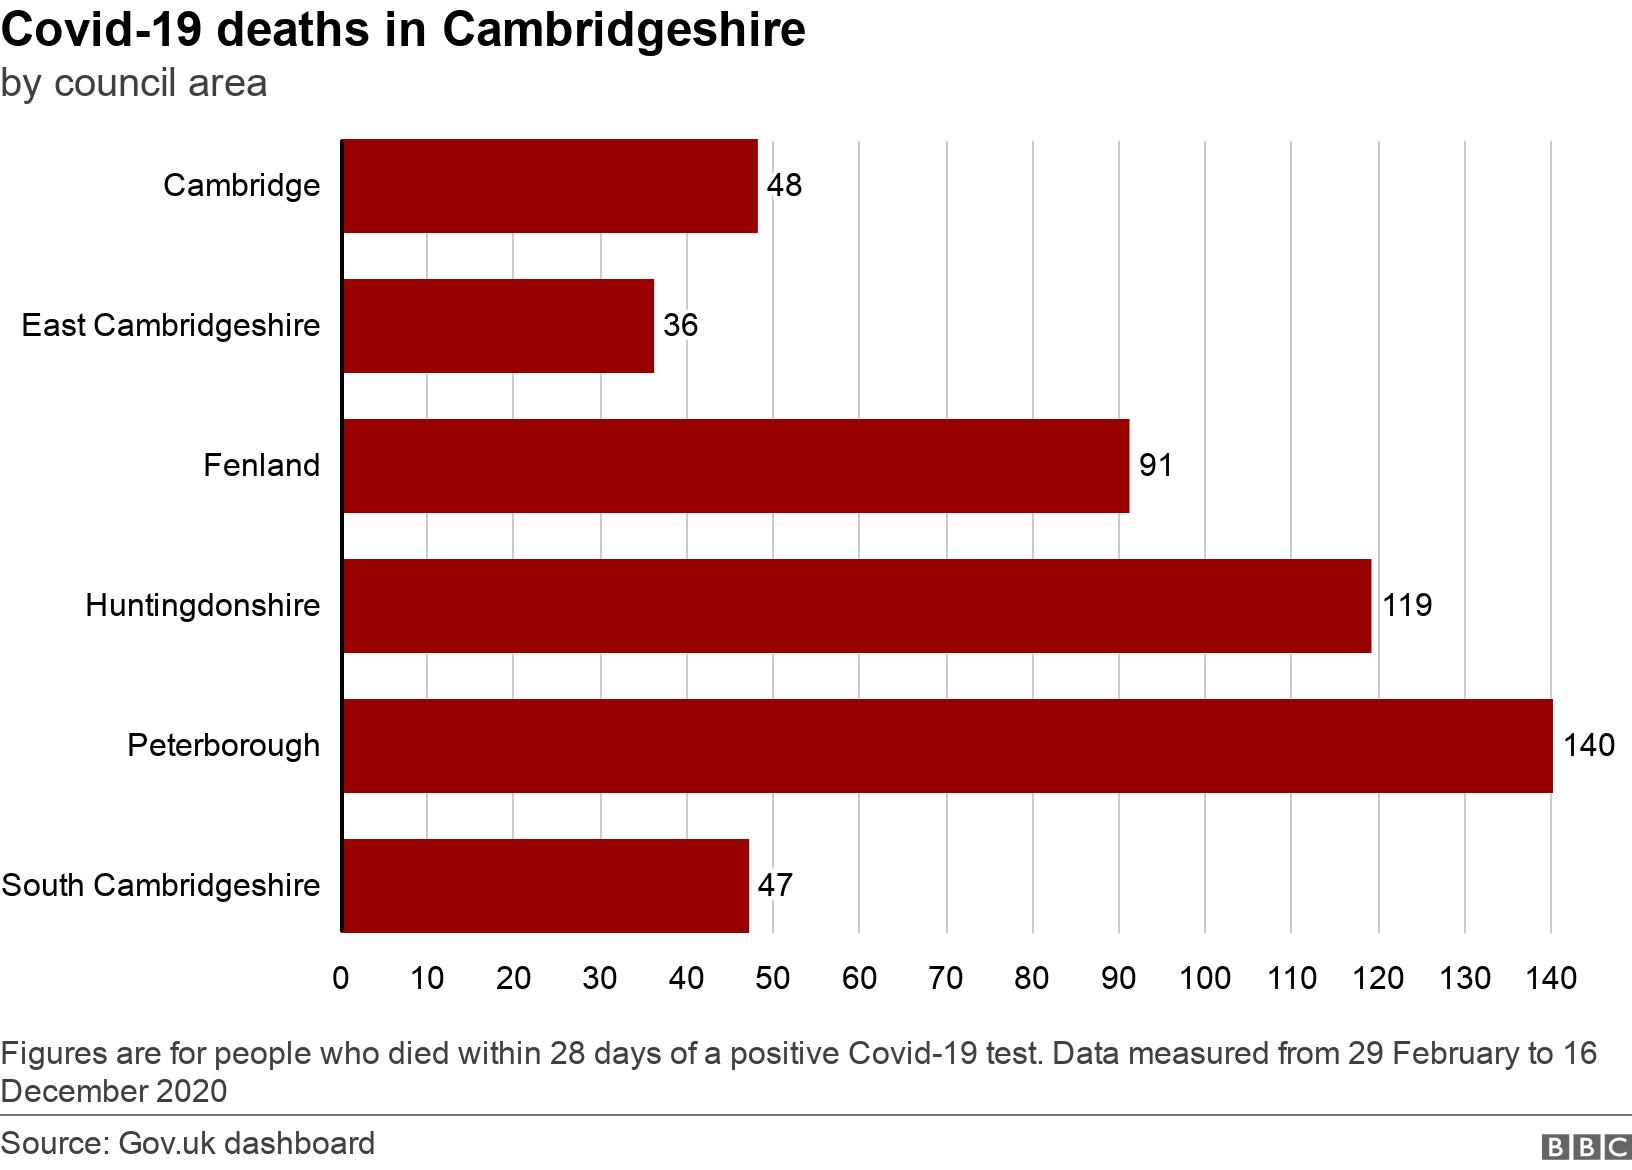 Covid-19 deaths in Cambridgeshire. by council area. Figures are for people who died within 28 days of a positive Covid-19 test. Data measured from 29 February to 16 December 2020.